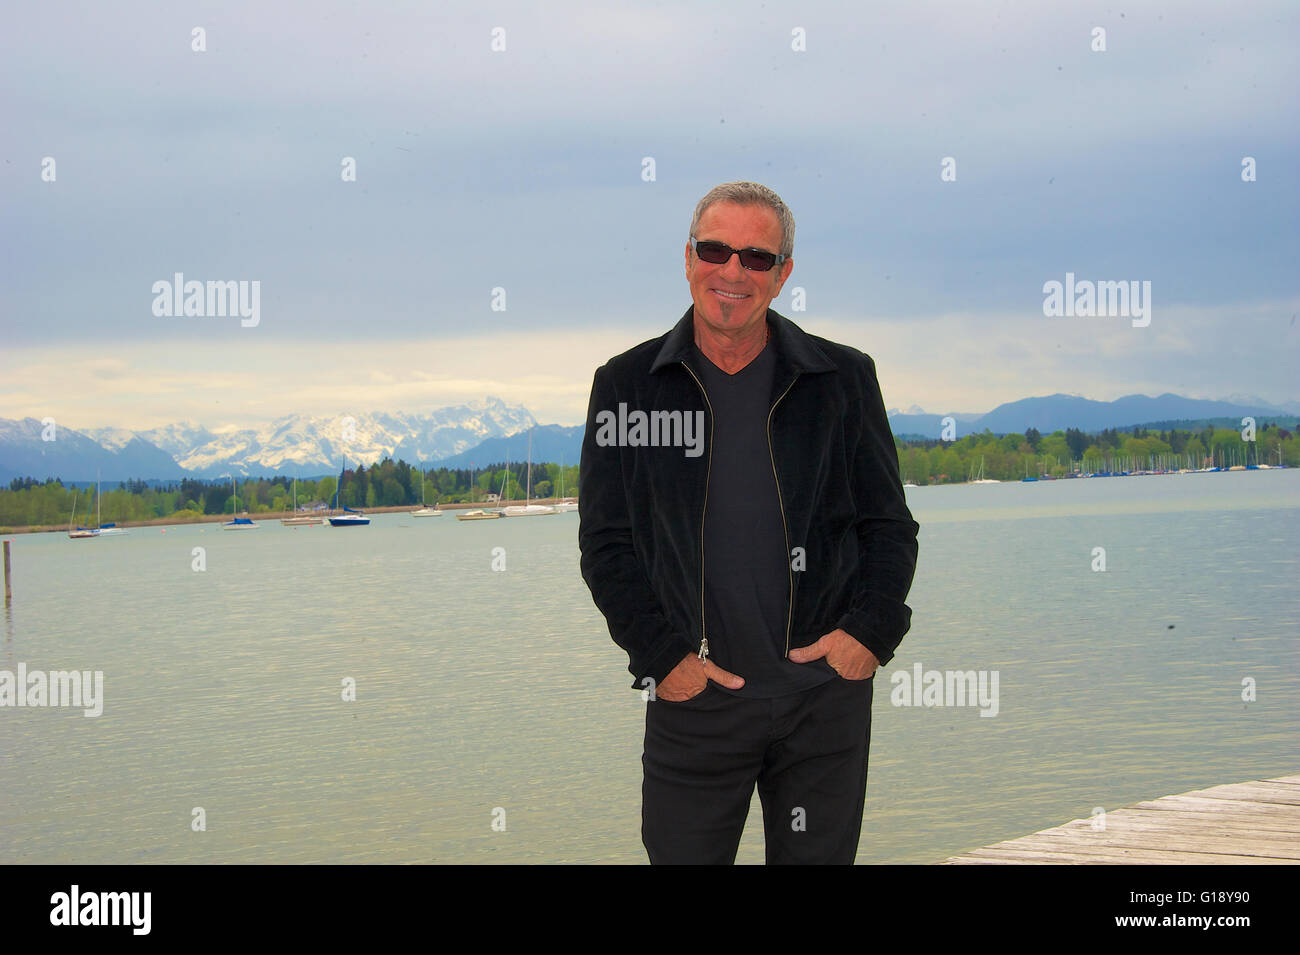 Seeshaupt, Germany. 10th May, 2016. dpa EXCLUSIVE - Tico Torres, drummer of Bon Jovi, stands on a jetty after a presentation of his 'Rock Star Baby' fashion collection at the Lupaco Concept Store in Seeshaupt, Germany, 10 May 2016. Photo: Ursula Dueren/dpa/Alamy Live News Stock Photo